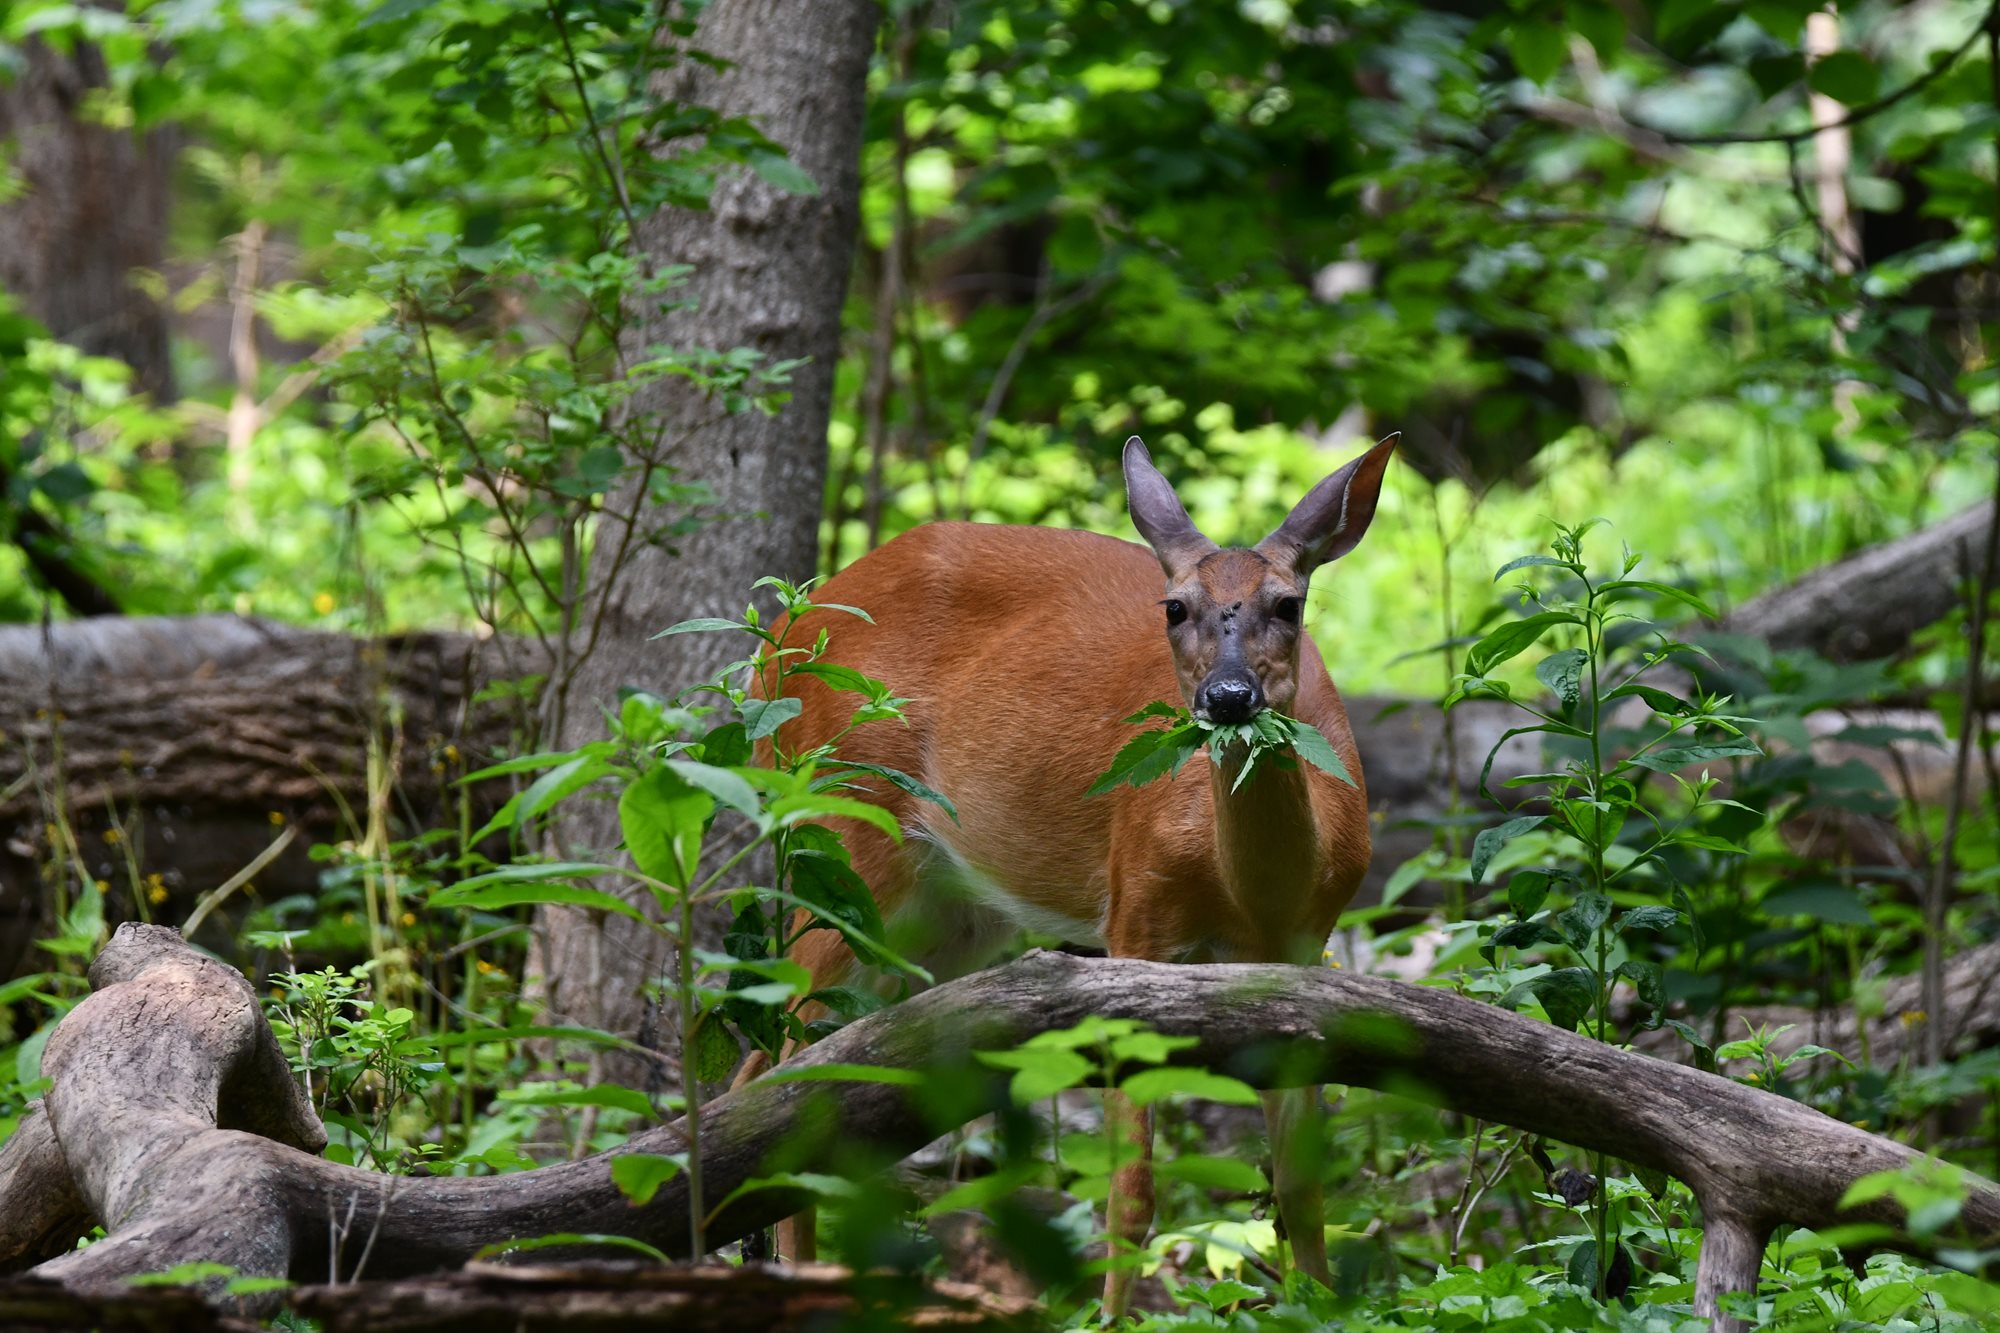 A deer looking at the camera in the forest.